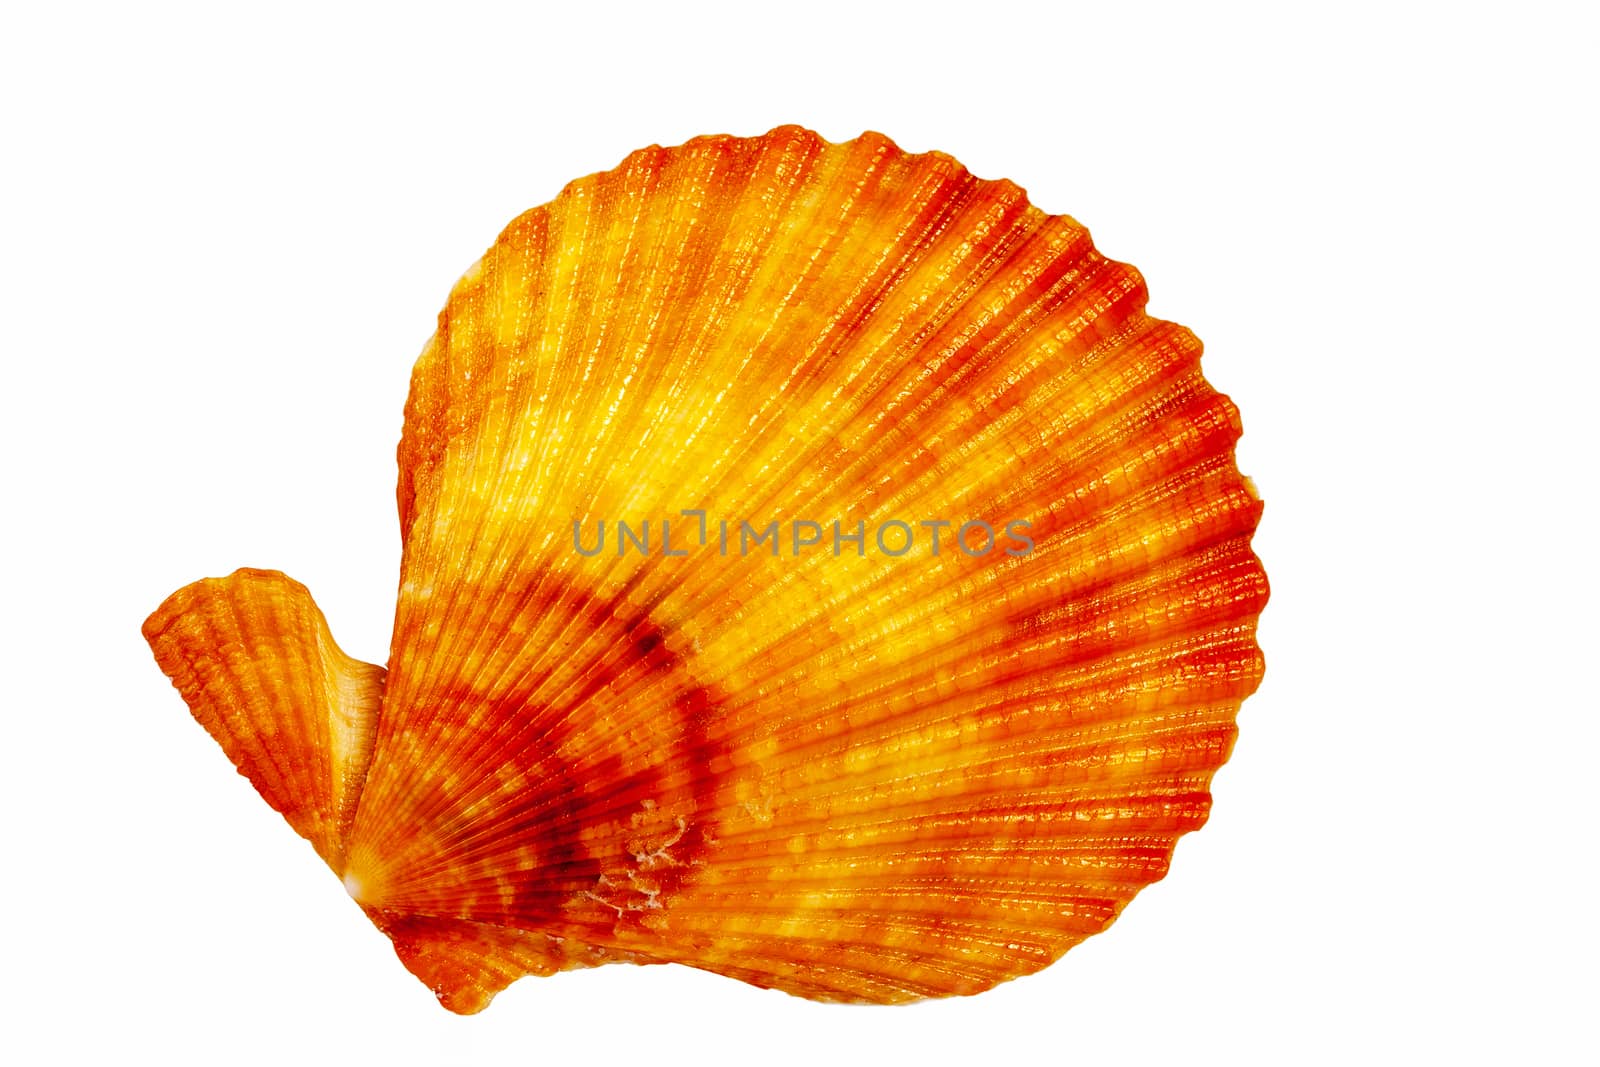 Sea shell of mollusk isolated on white background, close up by mychadre77